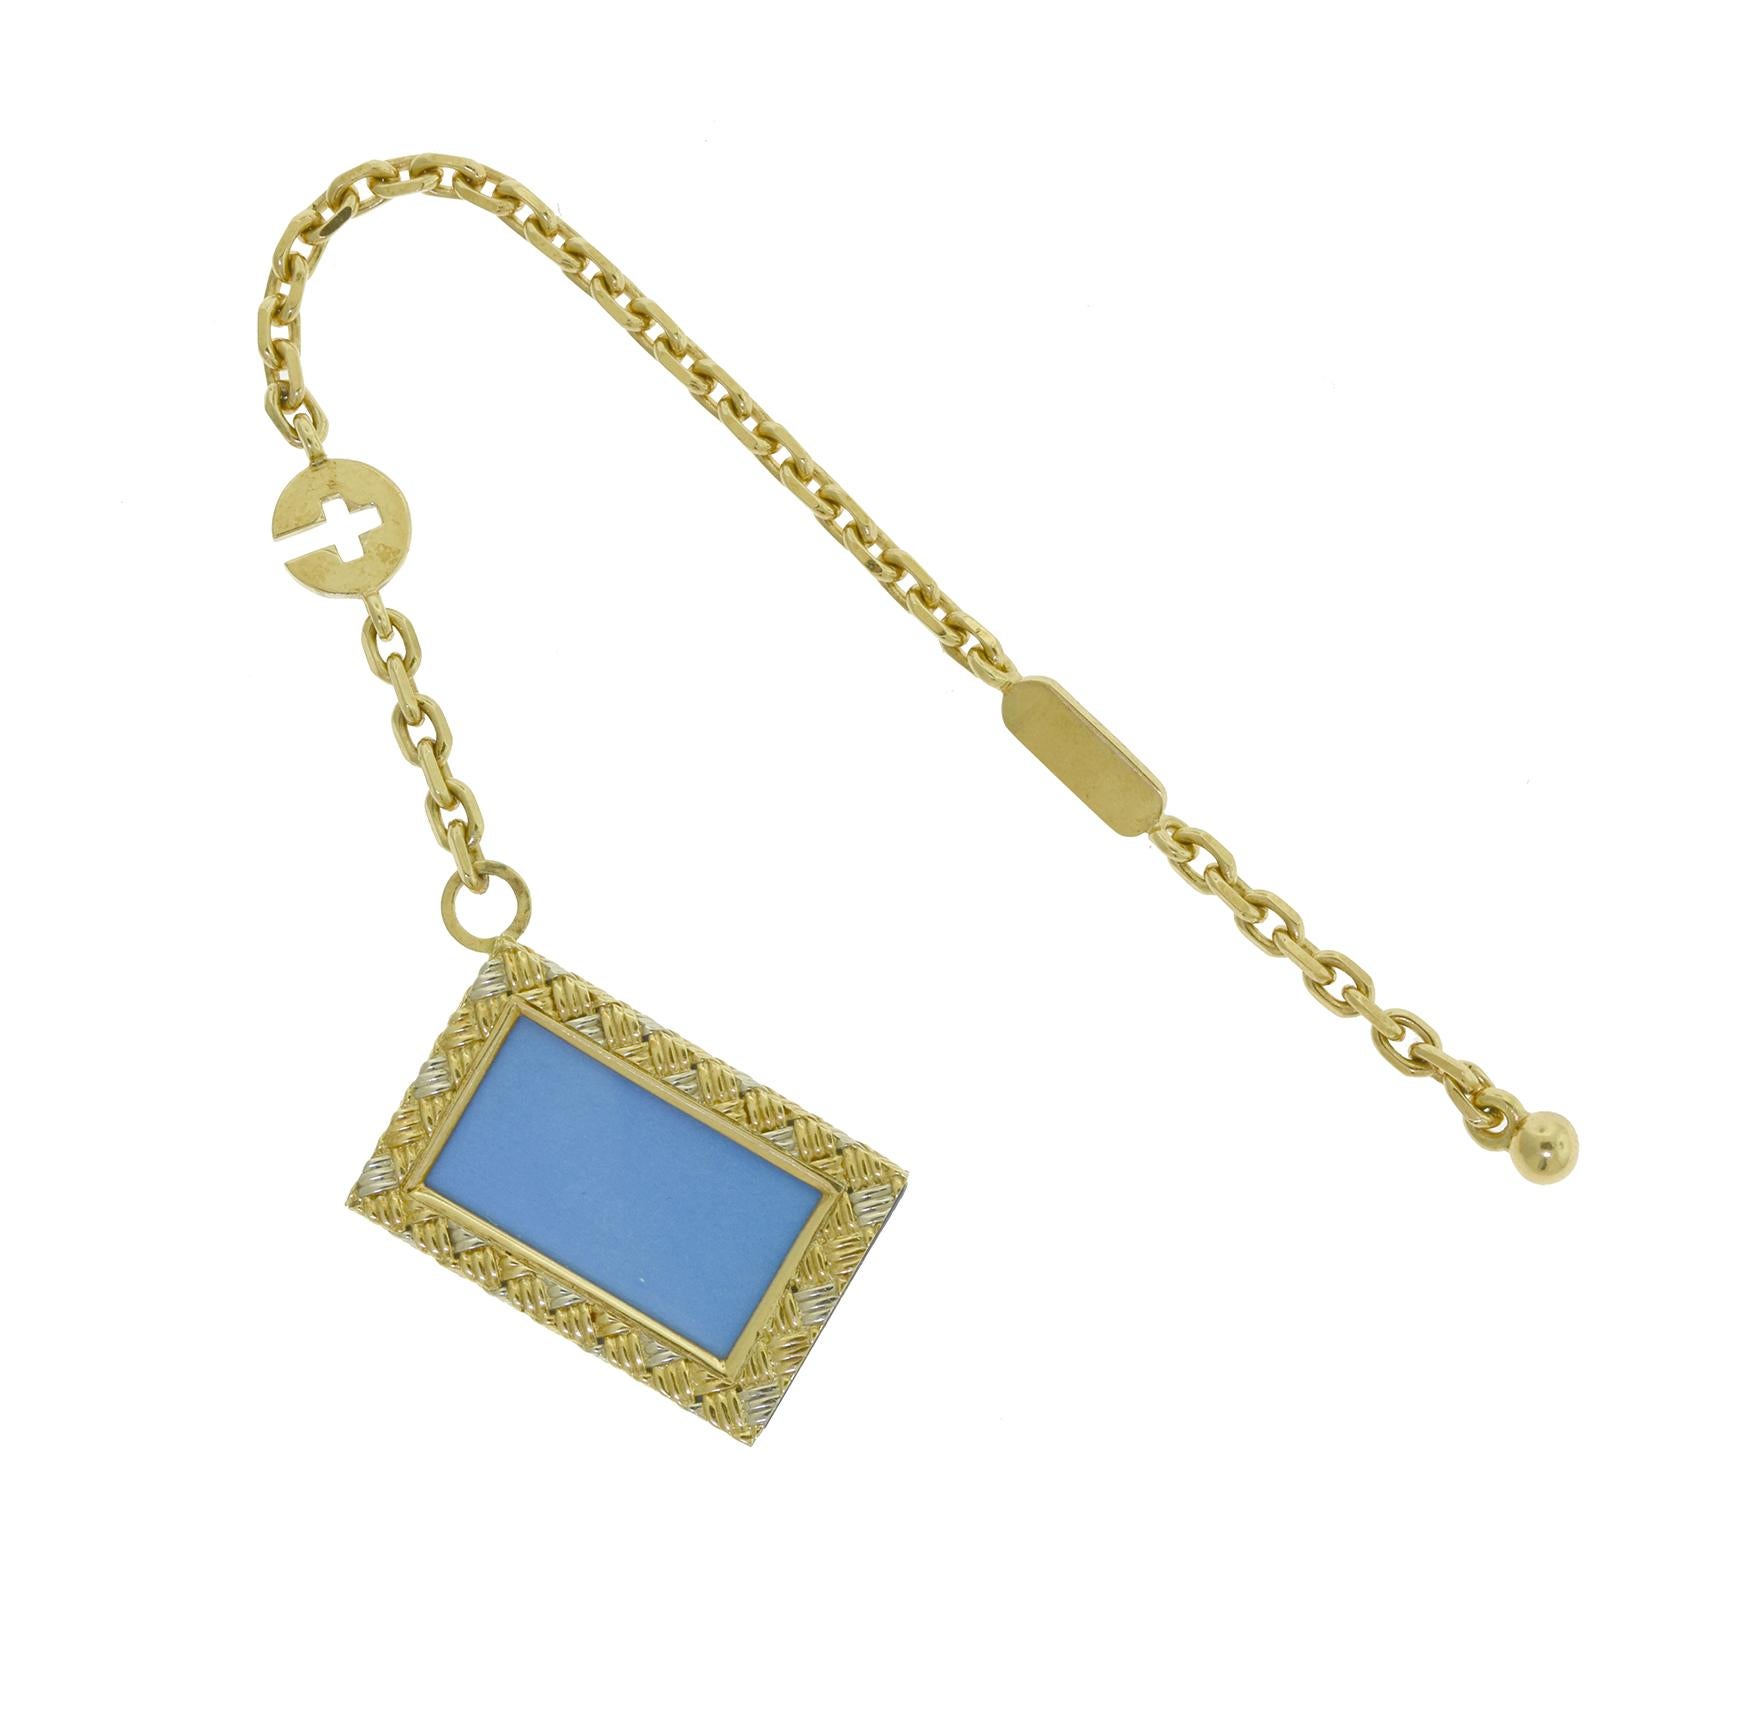 Brilliance Jewels, Miami
Questions? Call Us Anytime!
786,482,8100

Style: Photo Key Holder  

Metal:  White Gold, Yellow Gold 

Chain Length: 5.5 in 

​​​​​​​Photo Case Holder : 1 in

Total Item Weight (g): 13.5

Dimensions: 25.4 x 18.40